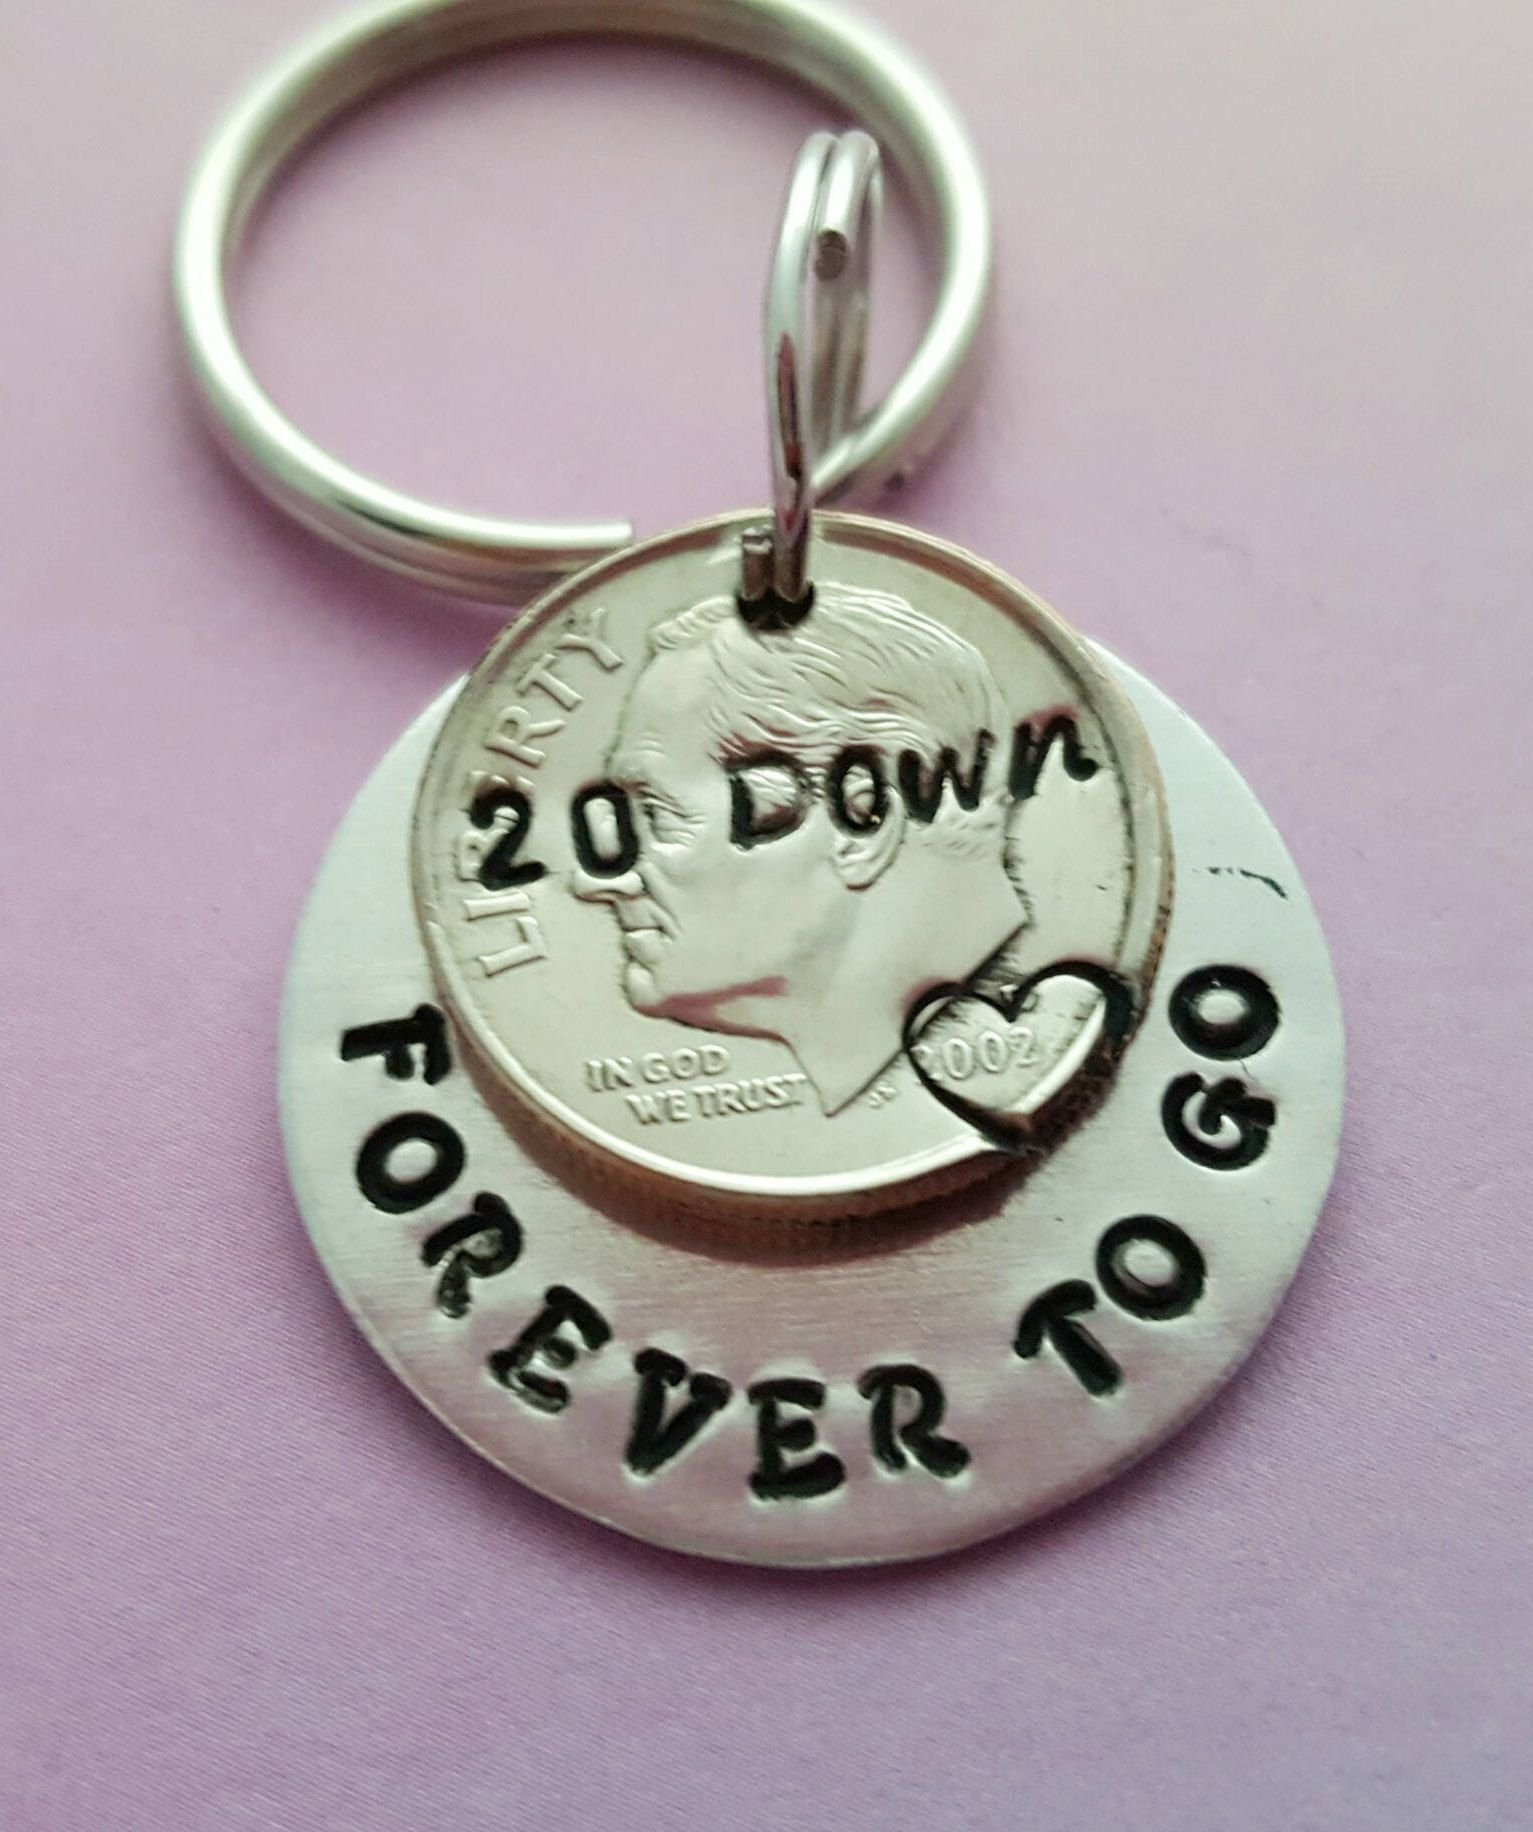 20Th Wedding Anniversary Gift Ideas For Couple
 10 Lovable Ideas For 20Th Wedding Anniversary 2020